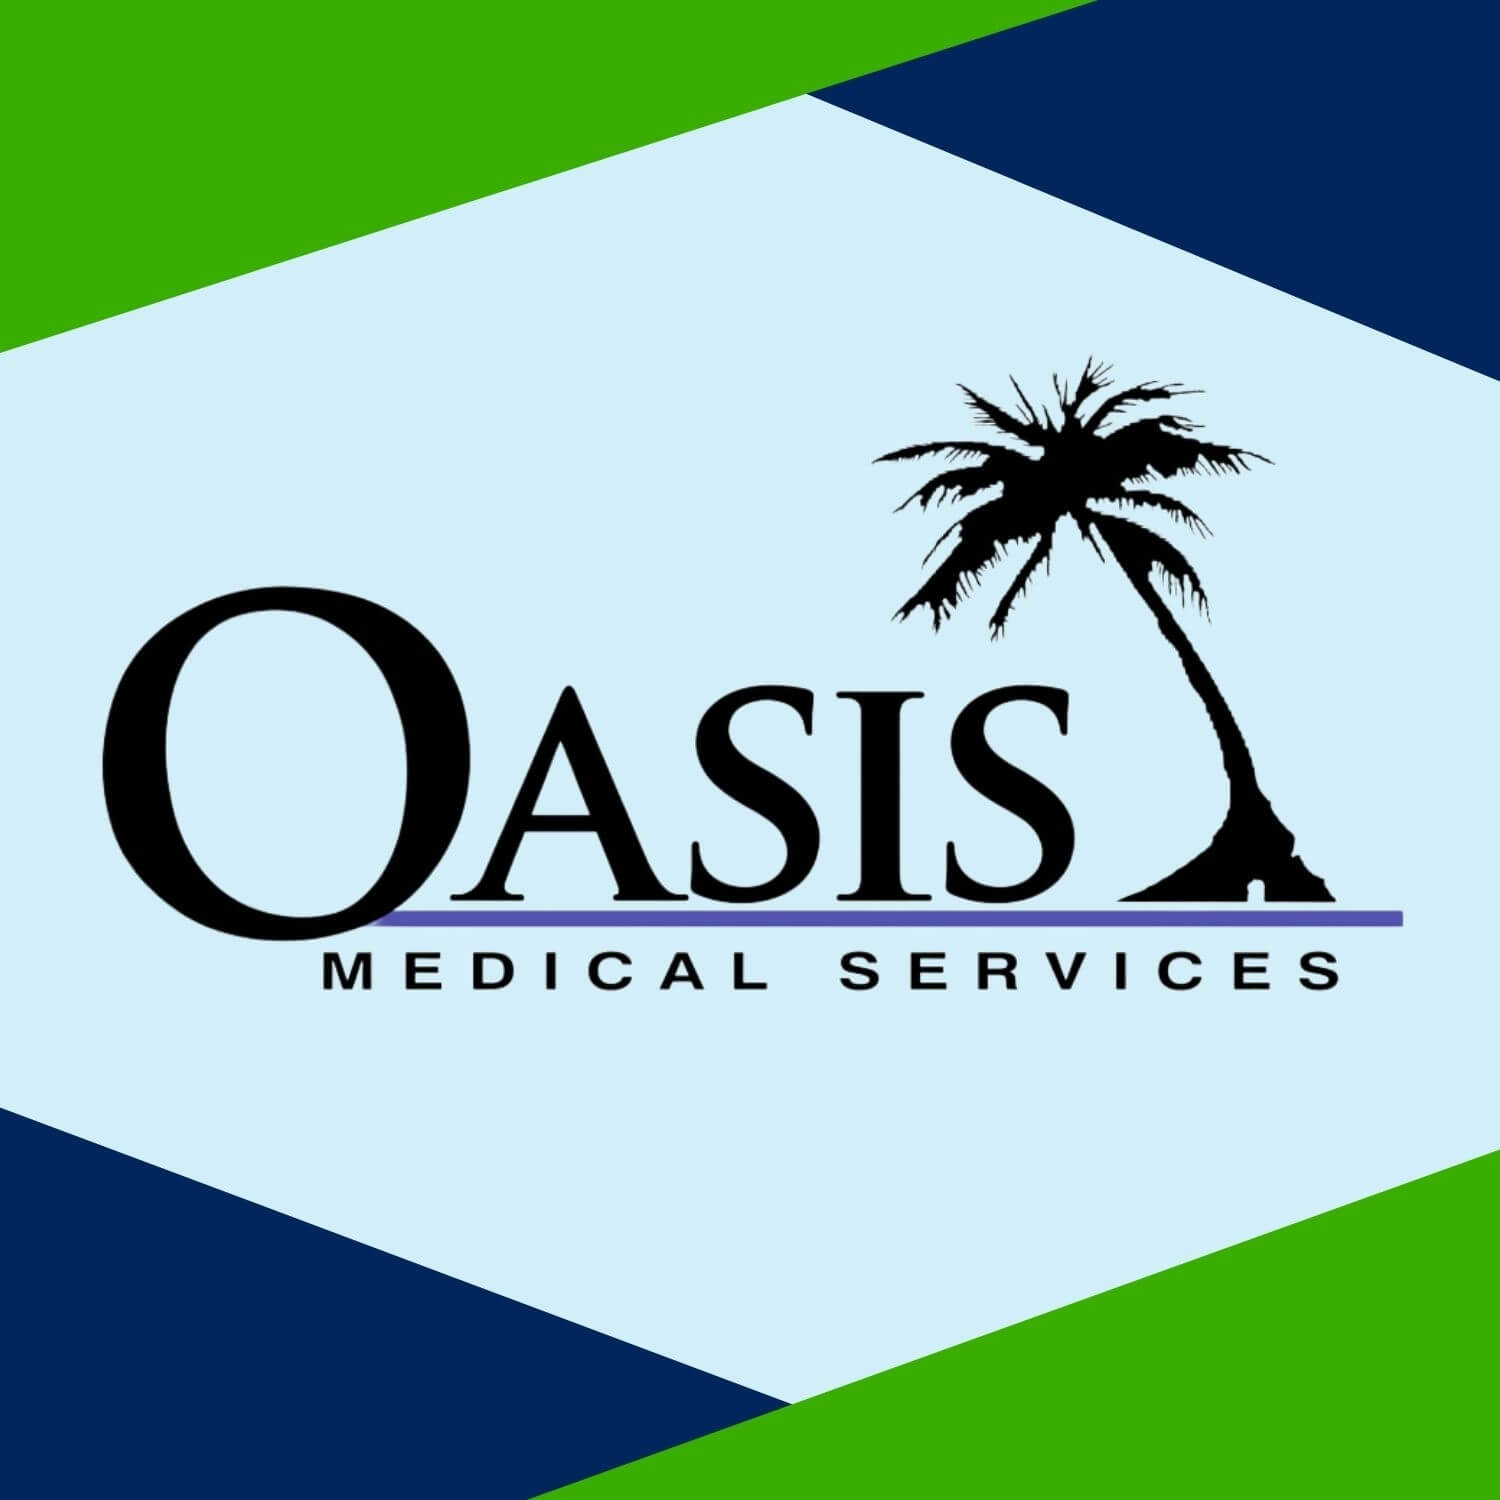 Oasis Medical Services